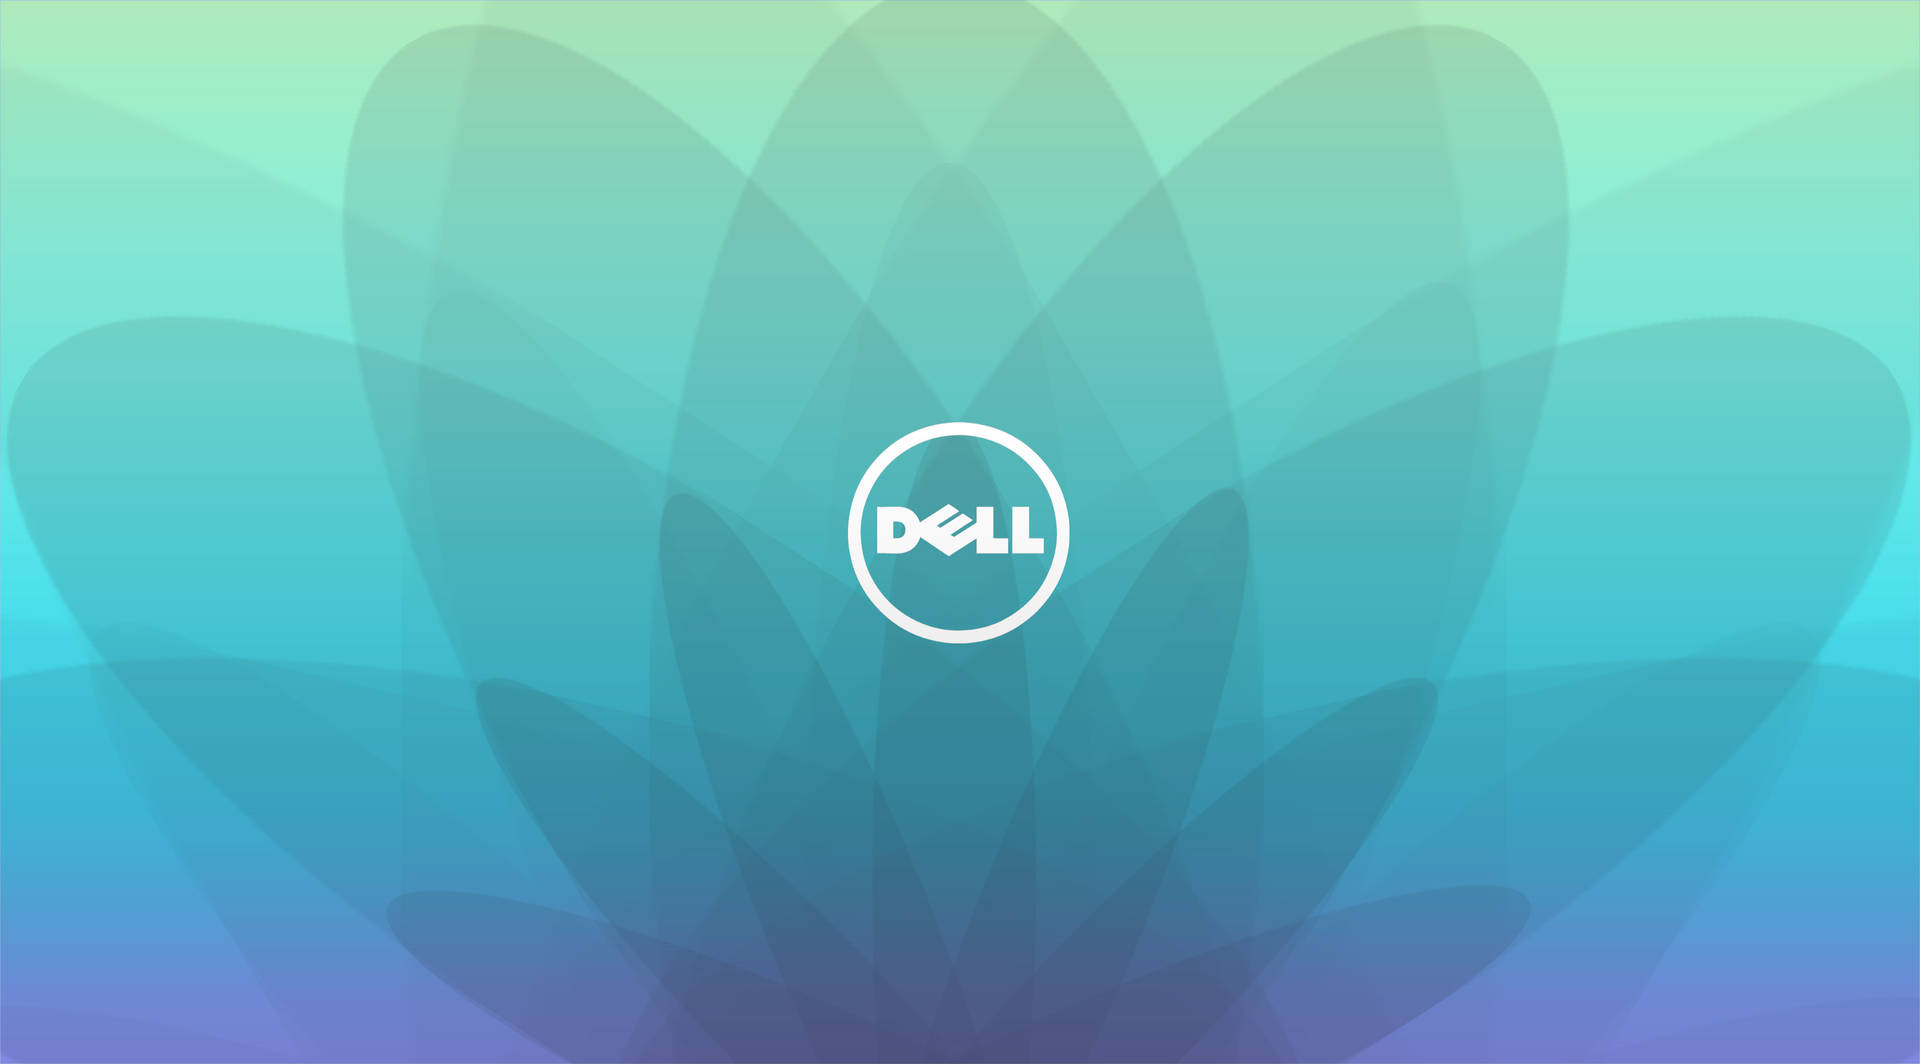 Cool Dell 4k Background Wallpaper